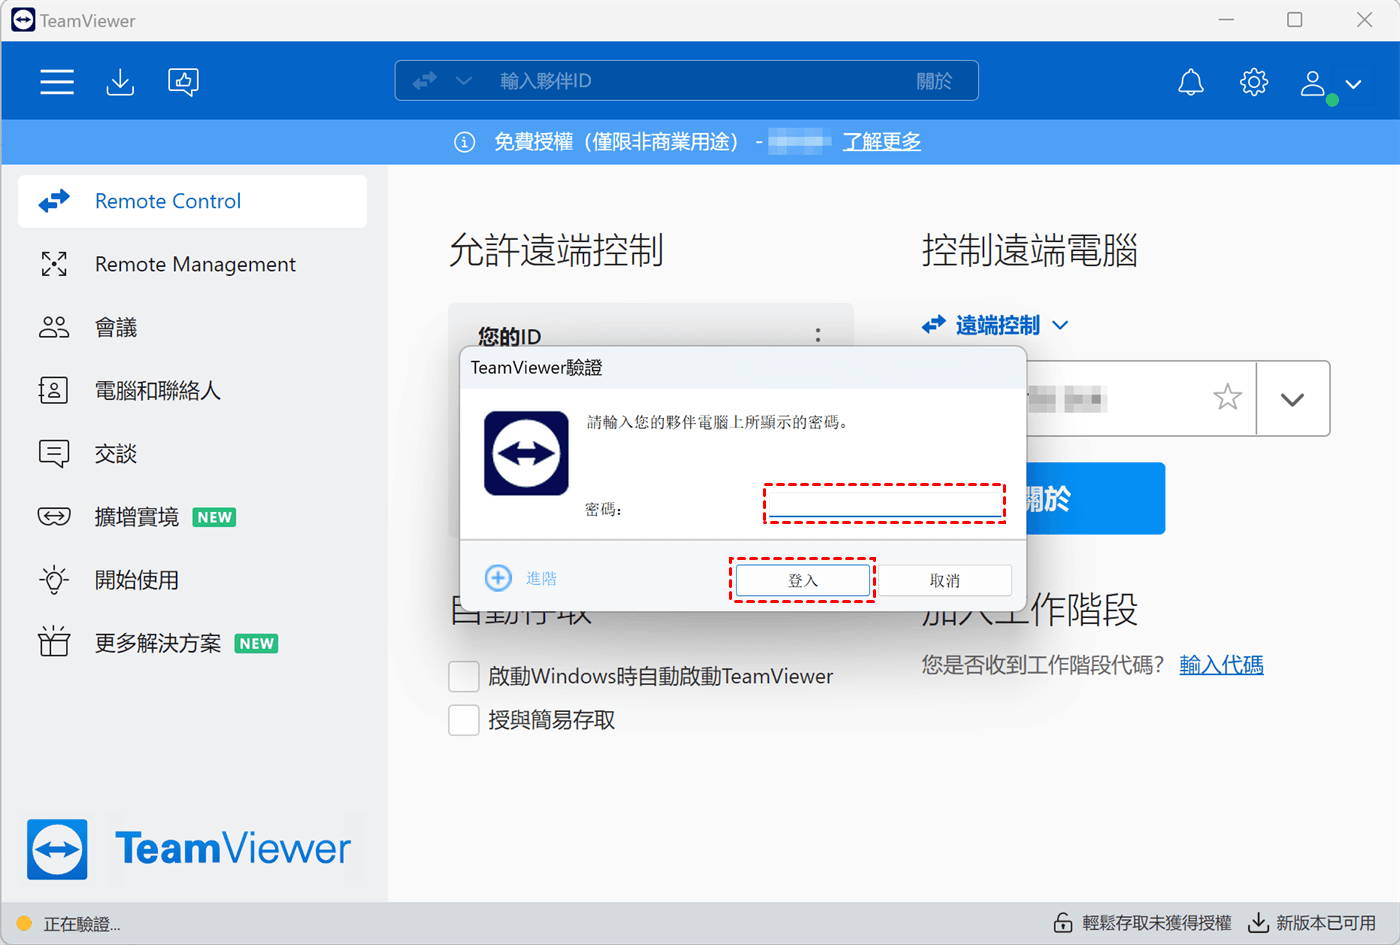 teamviewer-enters-the-remote-computer-password